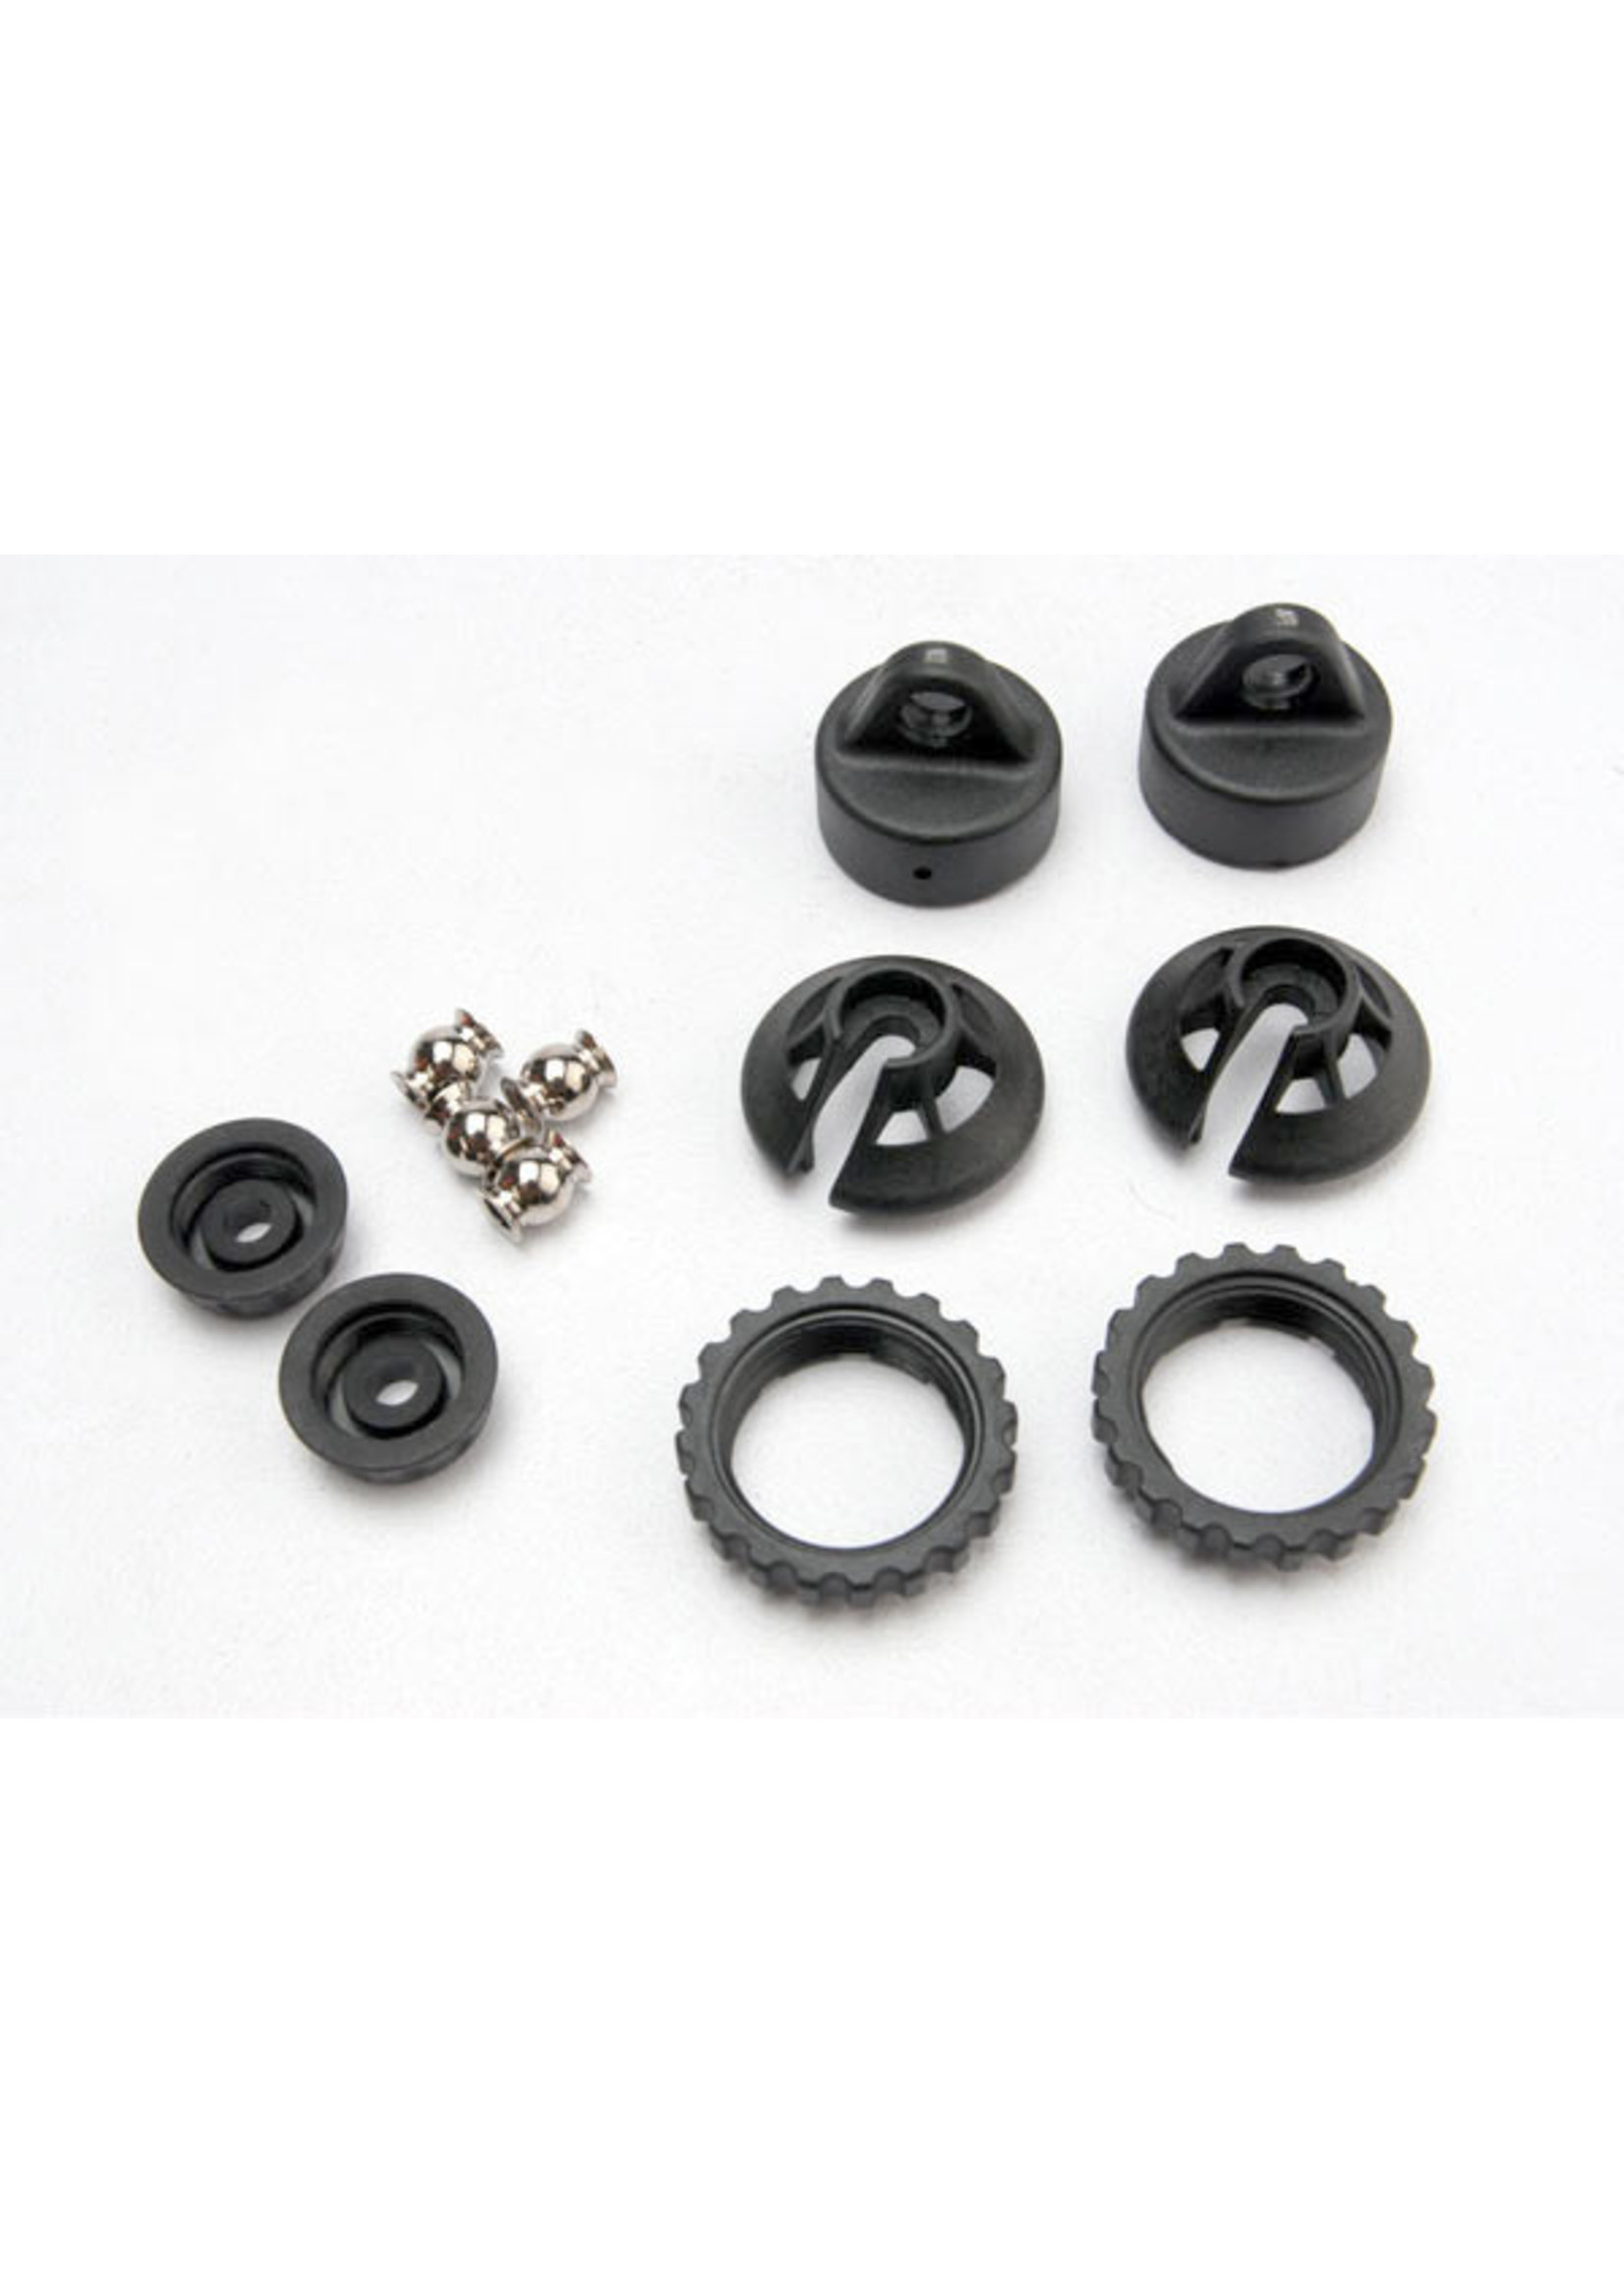 Traxxas 5465 - GTR Shock Caps and Spring Retainers (2)